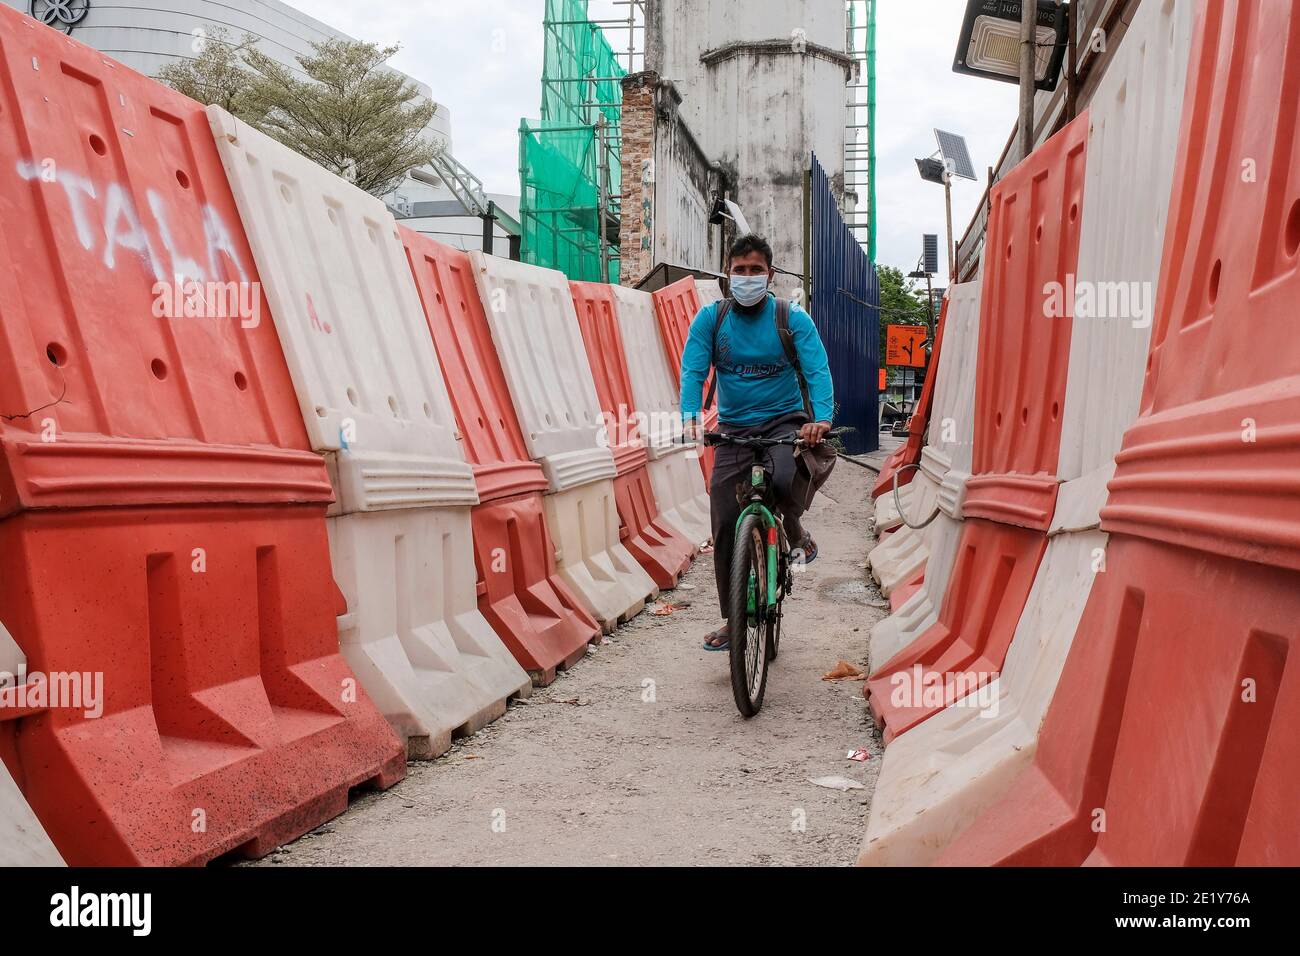 Kuala Lumpur, Malaysia. 10th Jan, 2021. A foreign worker wearing a face mask as a precaution against the spread of Covid-19 rides a bike through barricades in Kuala Lumpur. Credit: Faris Hadziq/SOPA Images/ZUMA Wire/Alamy Live News Stock Photo